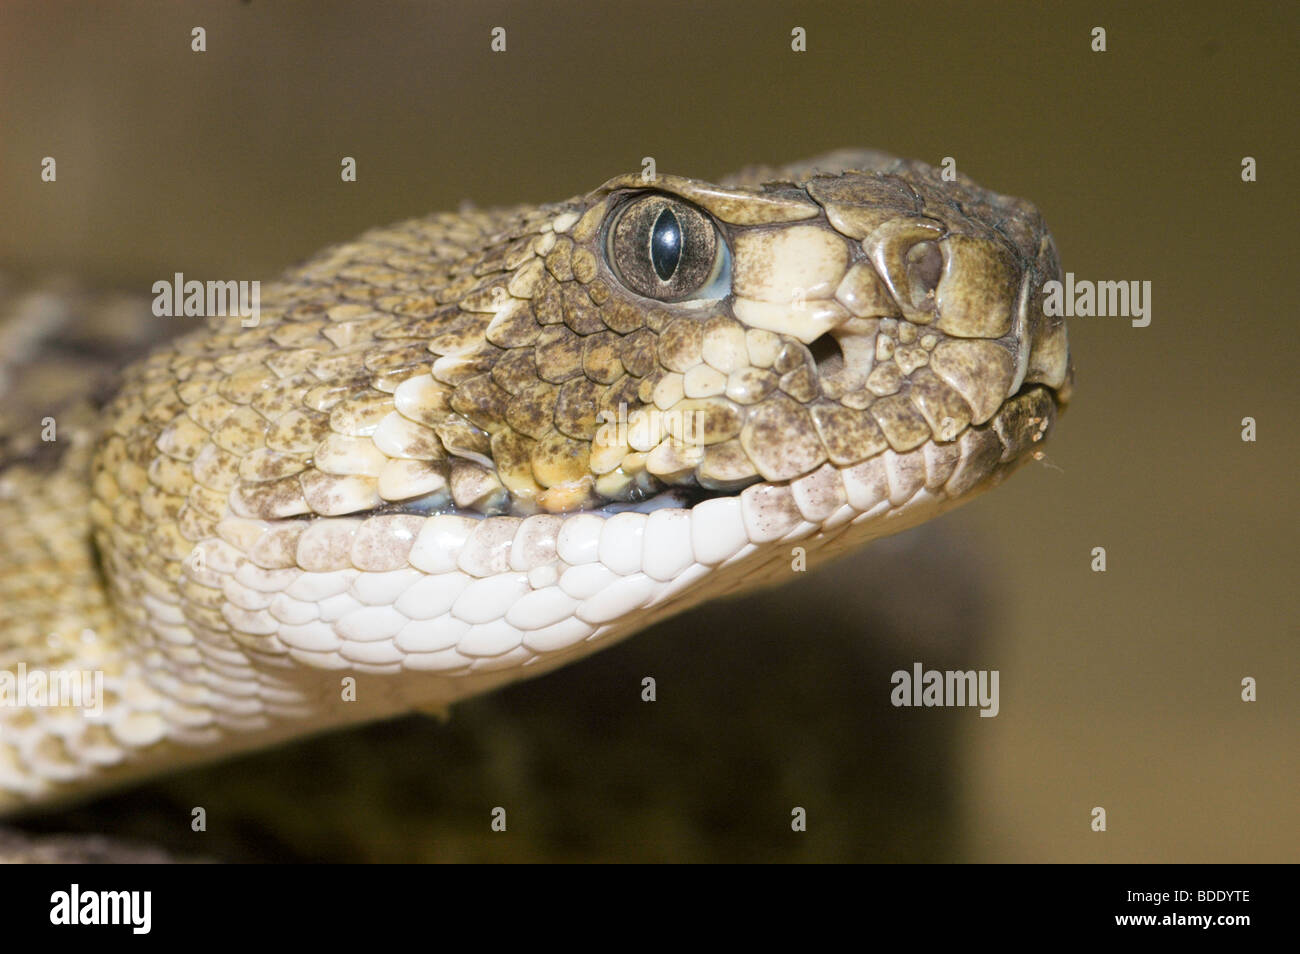 Painted Carpet Viper High Resolution Stock Photography and Images - Alamy